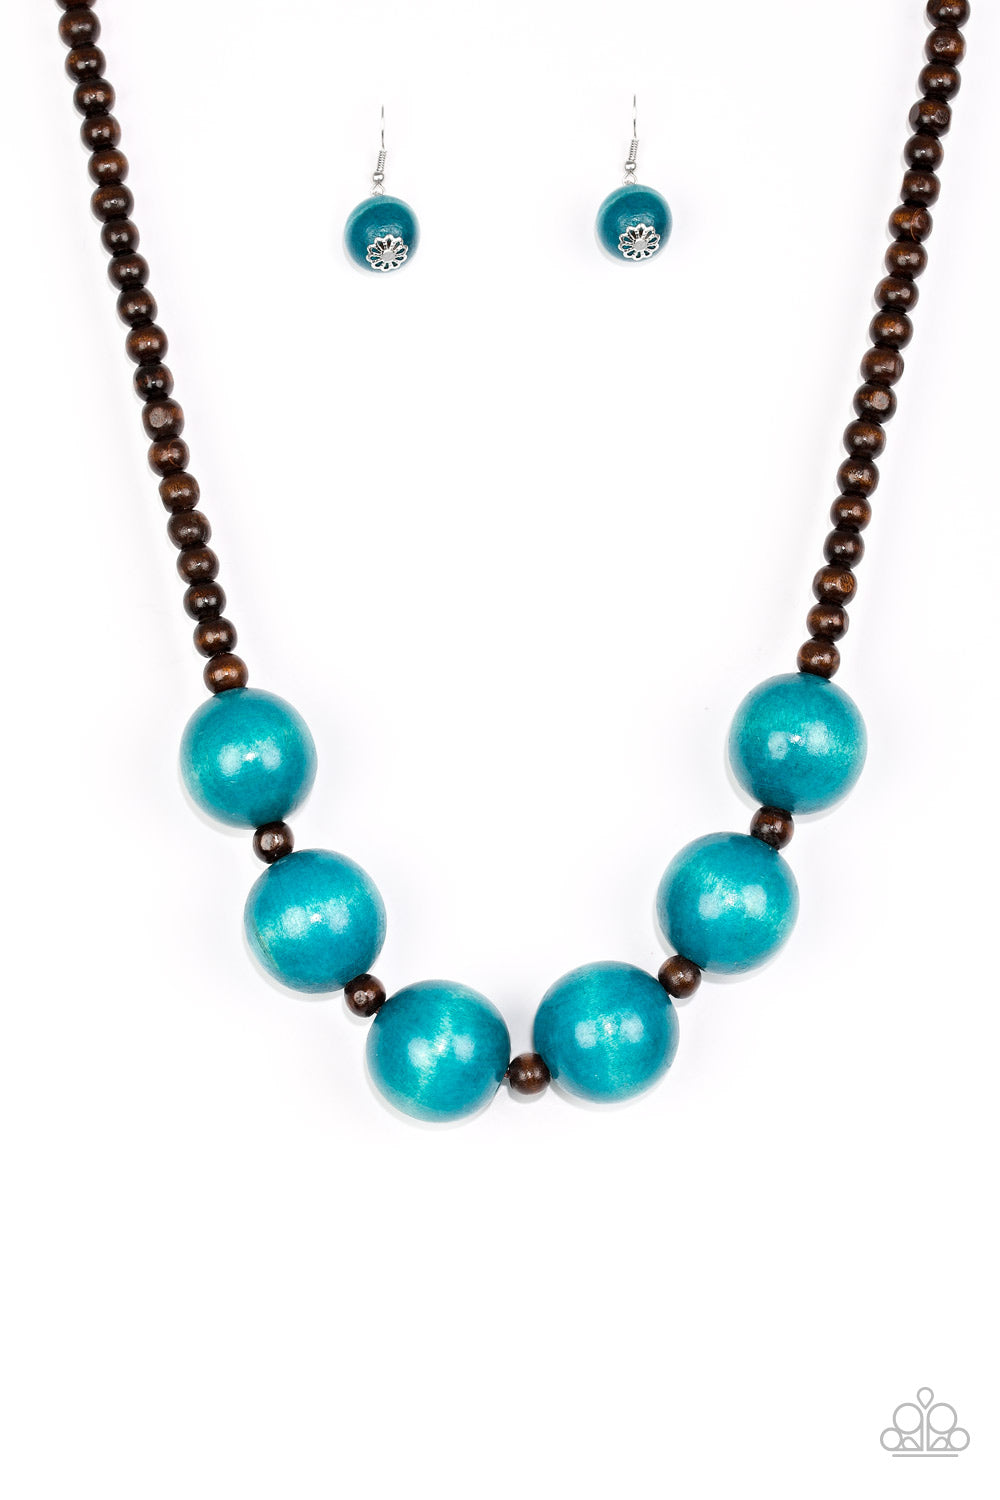 Paparazzi Accessories Oh My Miami - Blue Wood Necklaces - Lady T Accessories